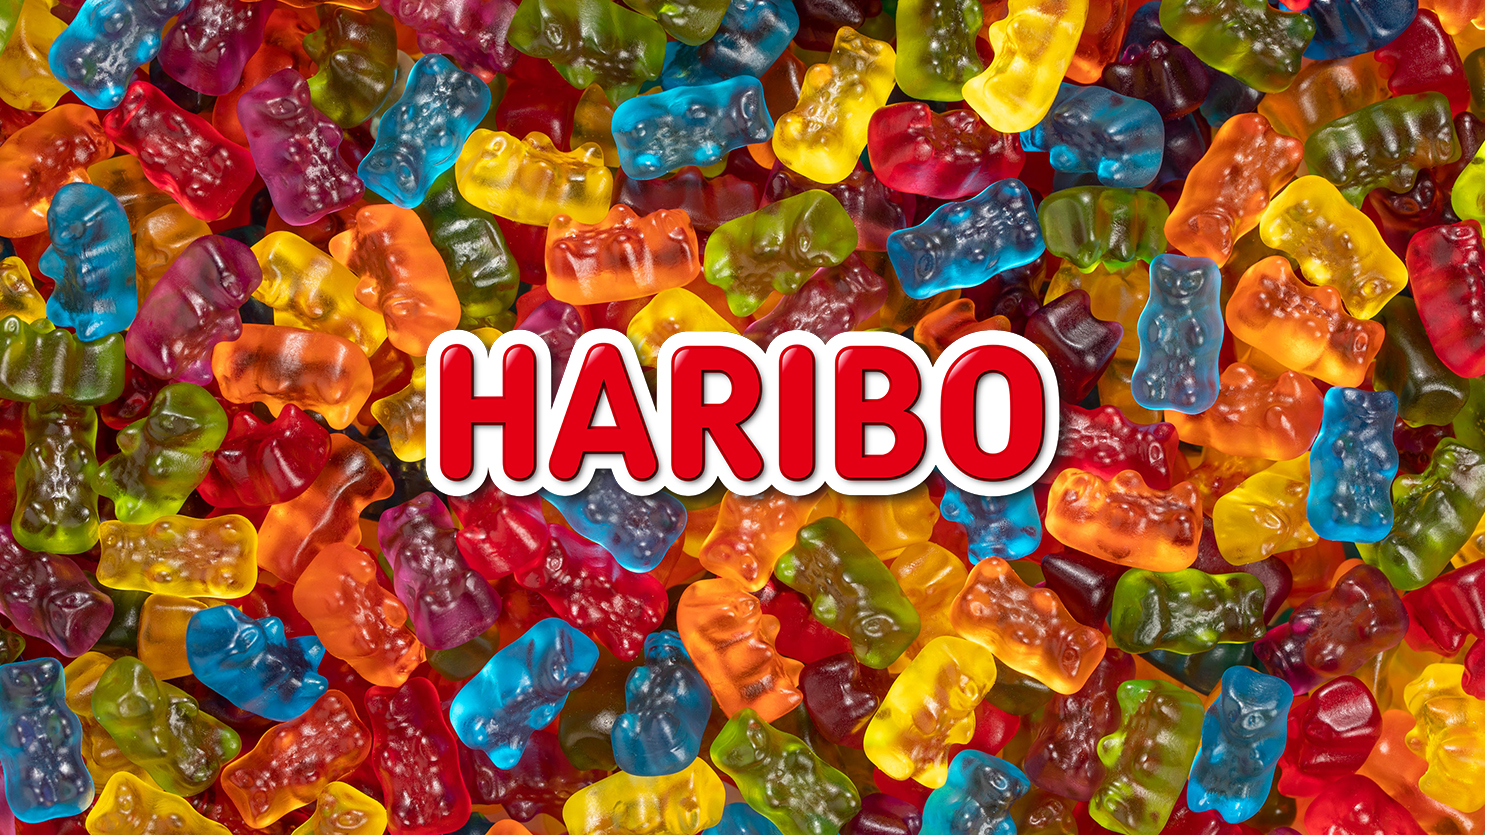 Content plan for Haribo